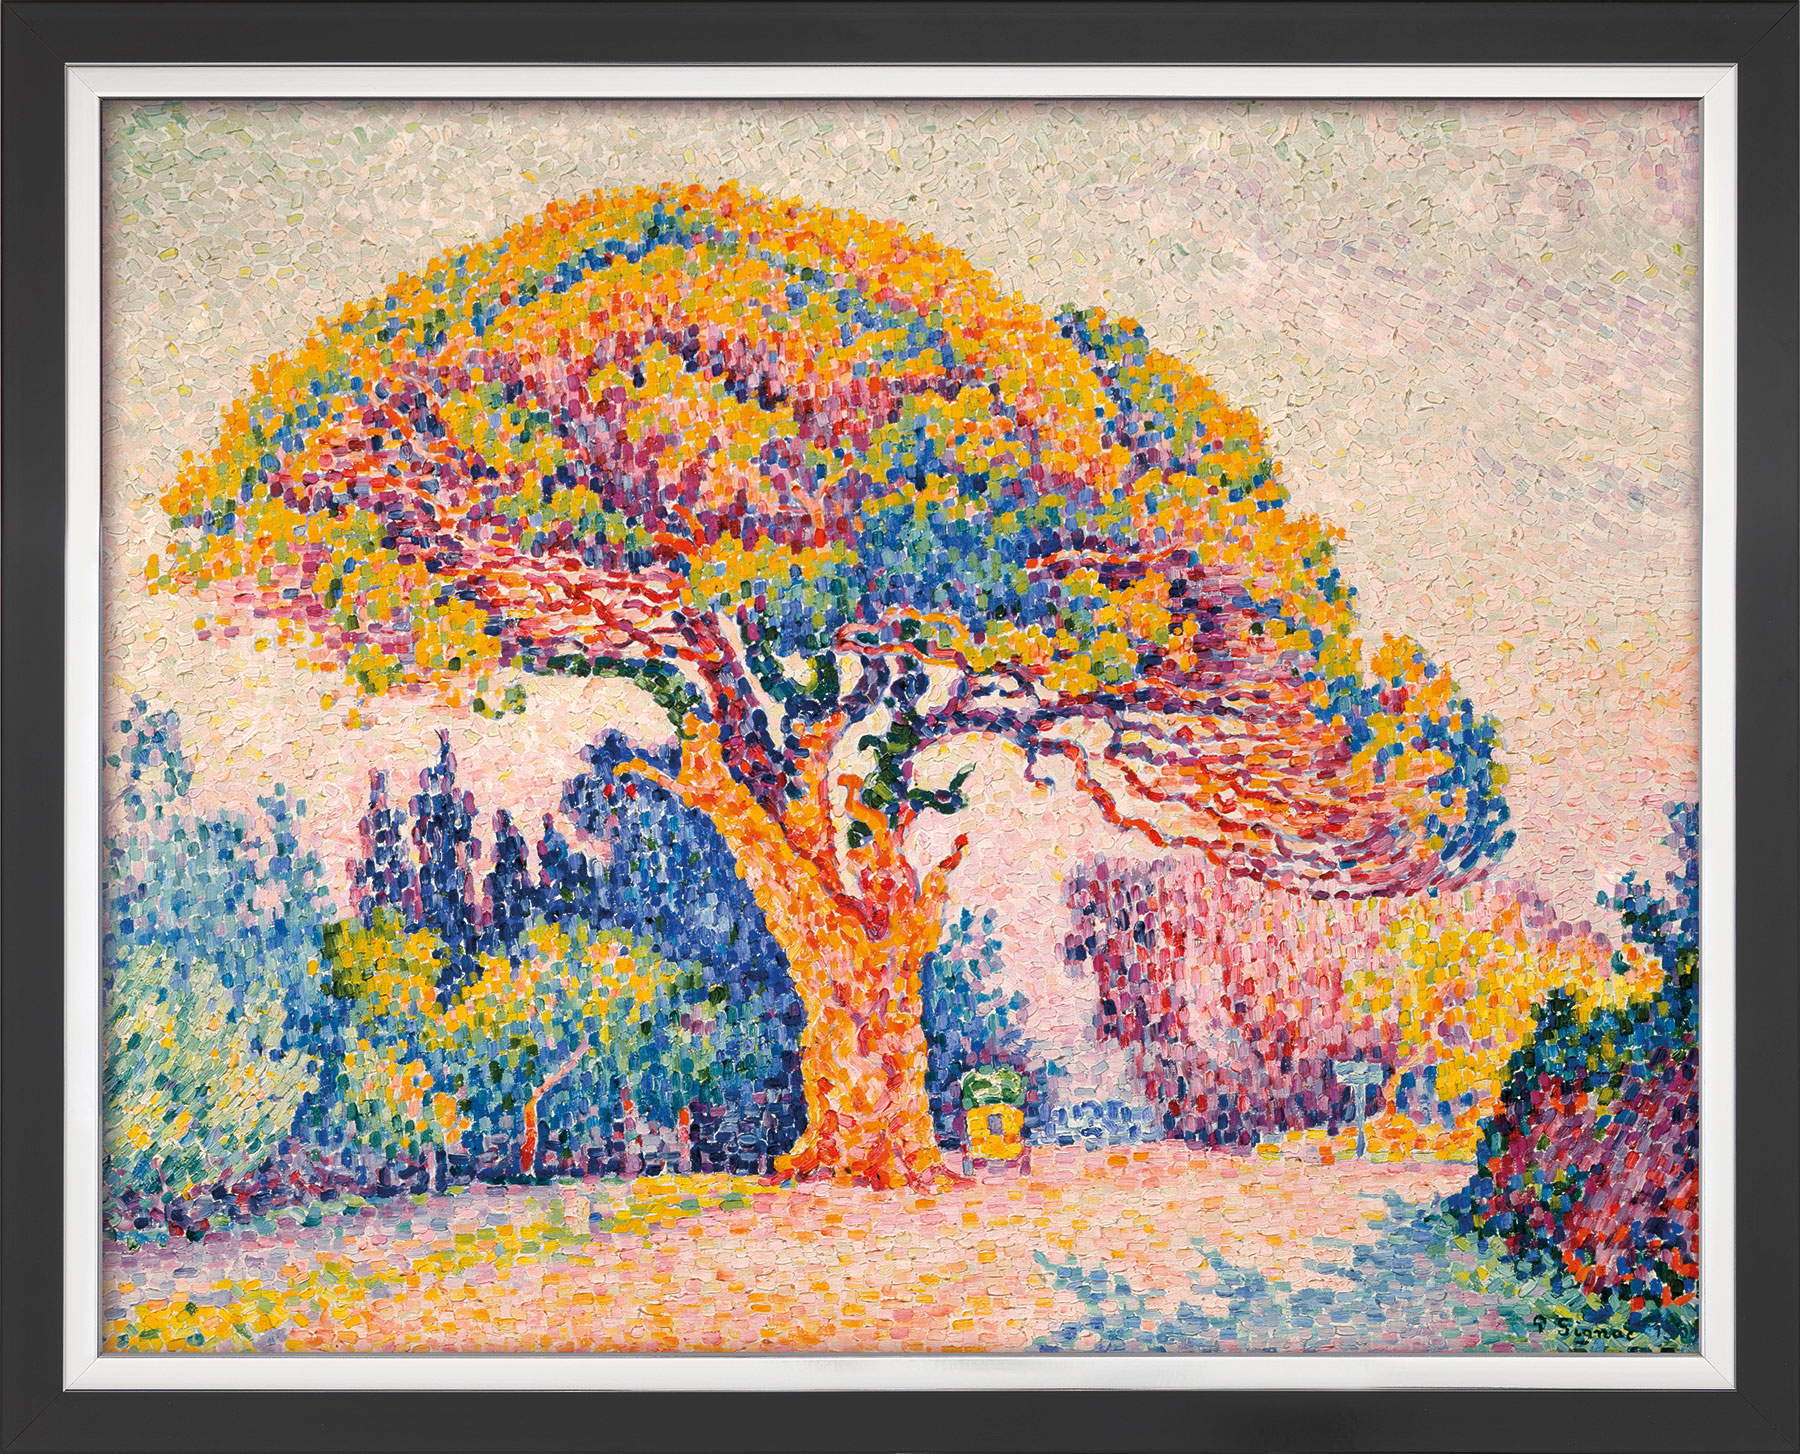 Picture "The Pine Tree of Bertaud (at Saint-Tropez)" (1909), black and silver-coloured framed version by Paul Signac